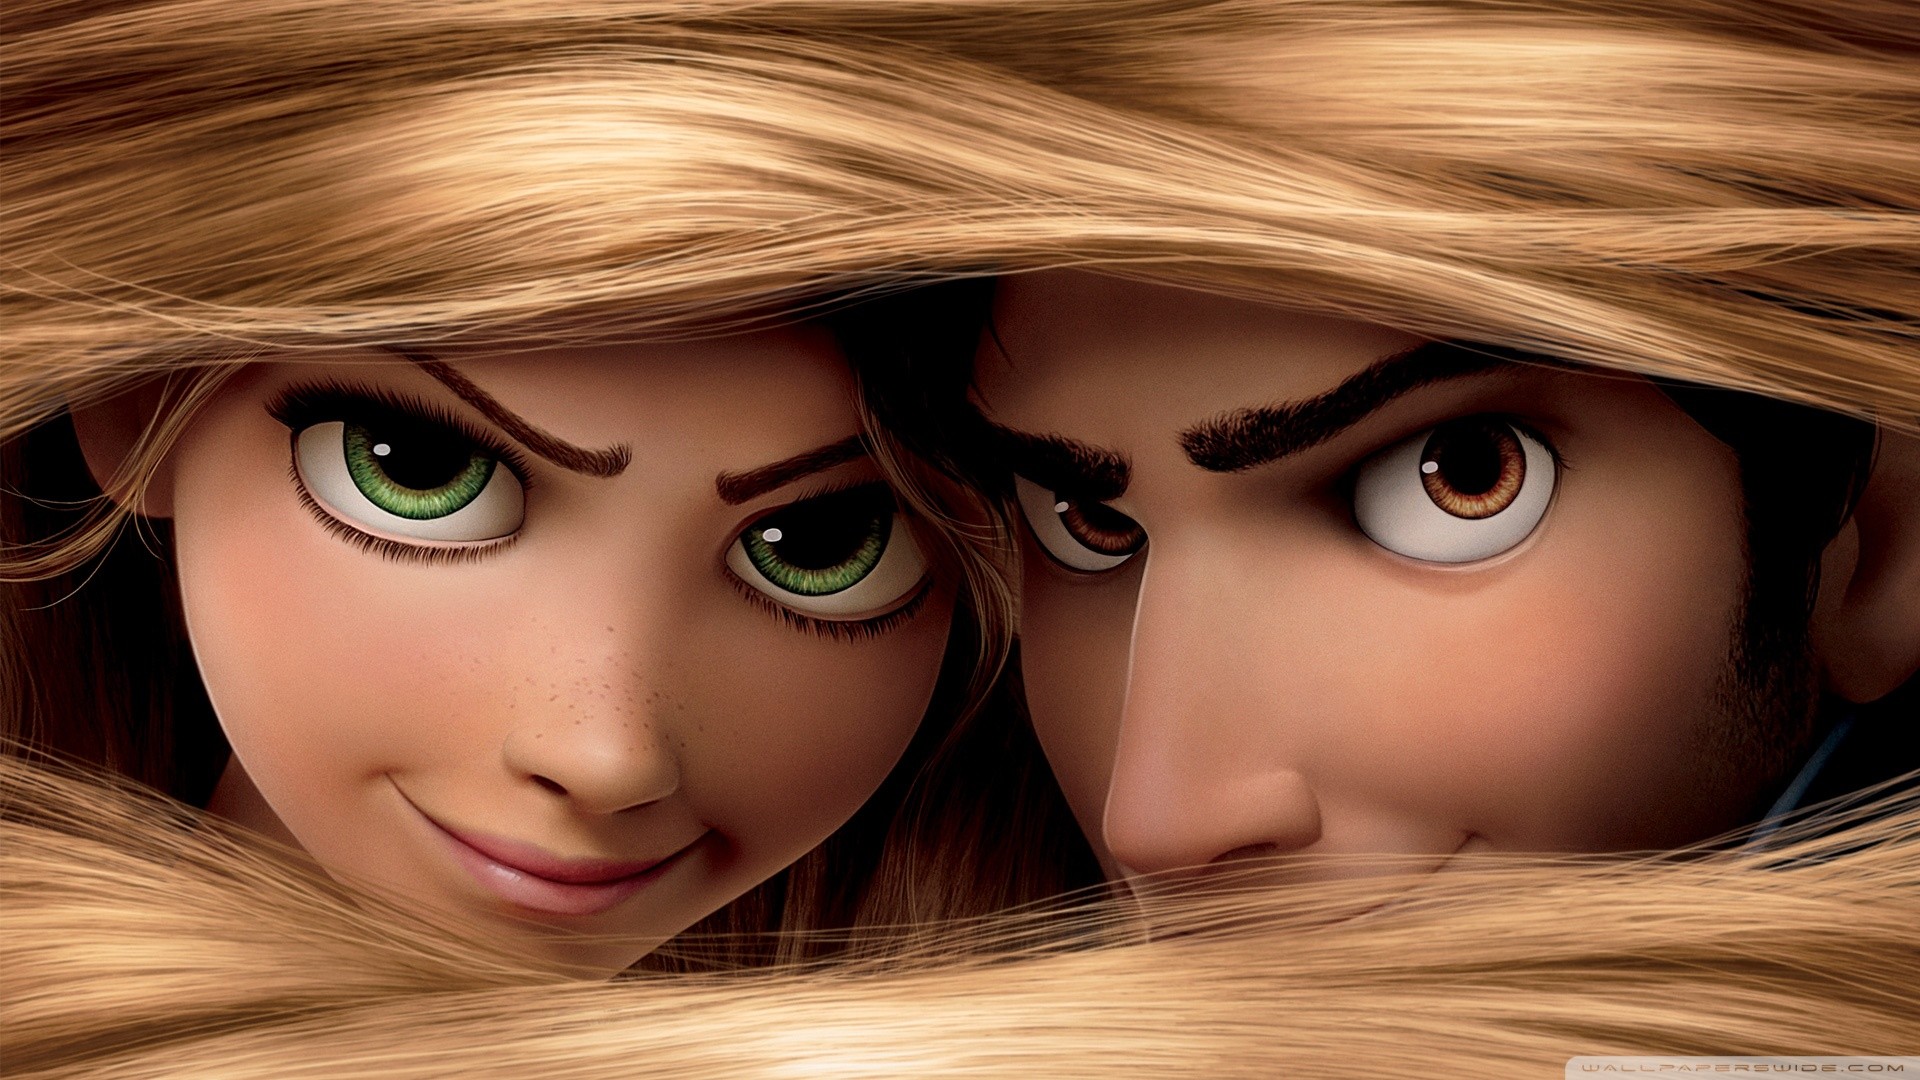 Disneys Movie Tangled HD Wide Wallpaper for Widescreen